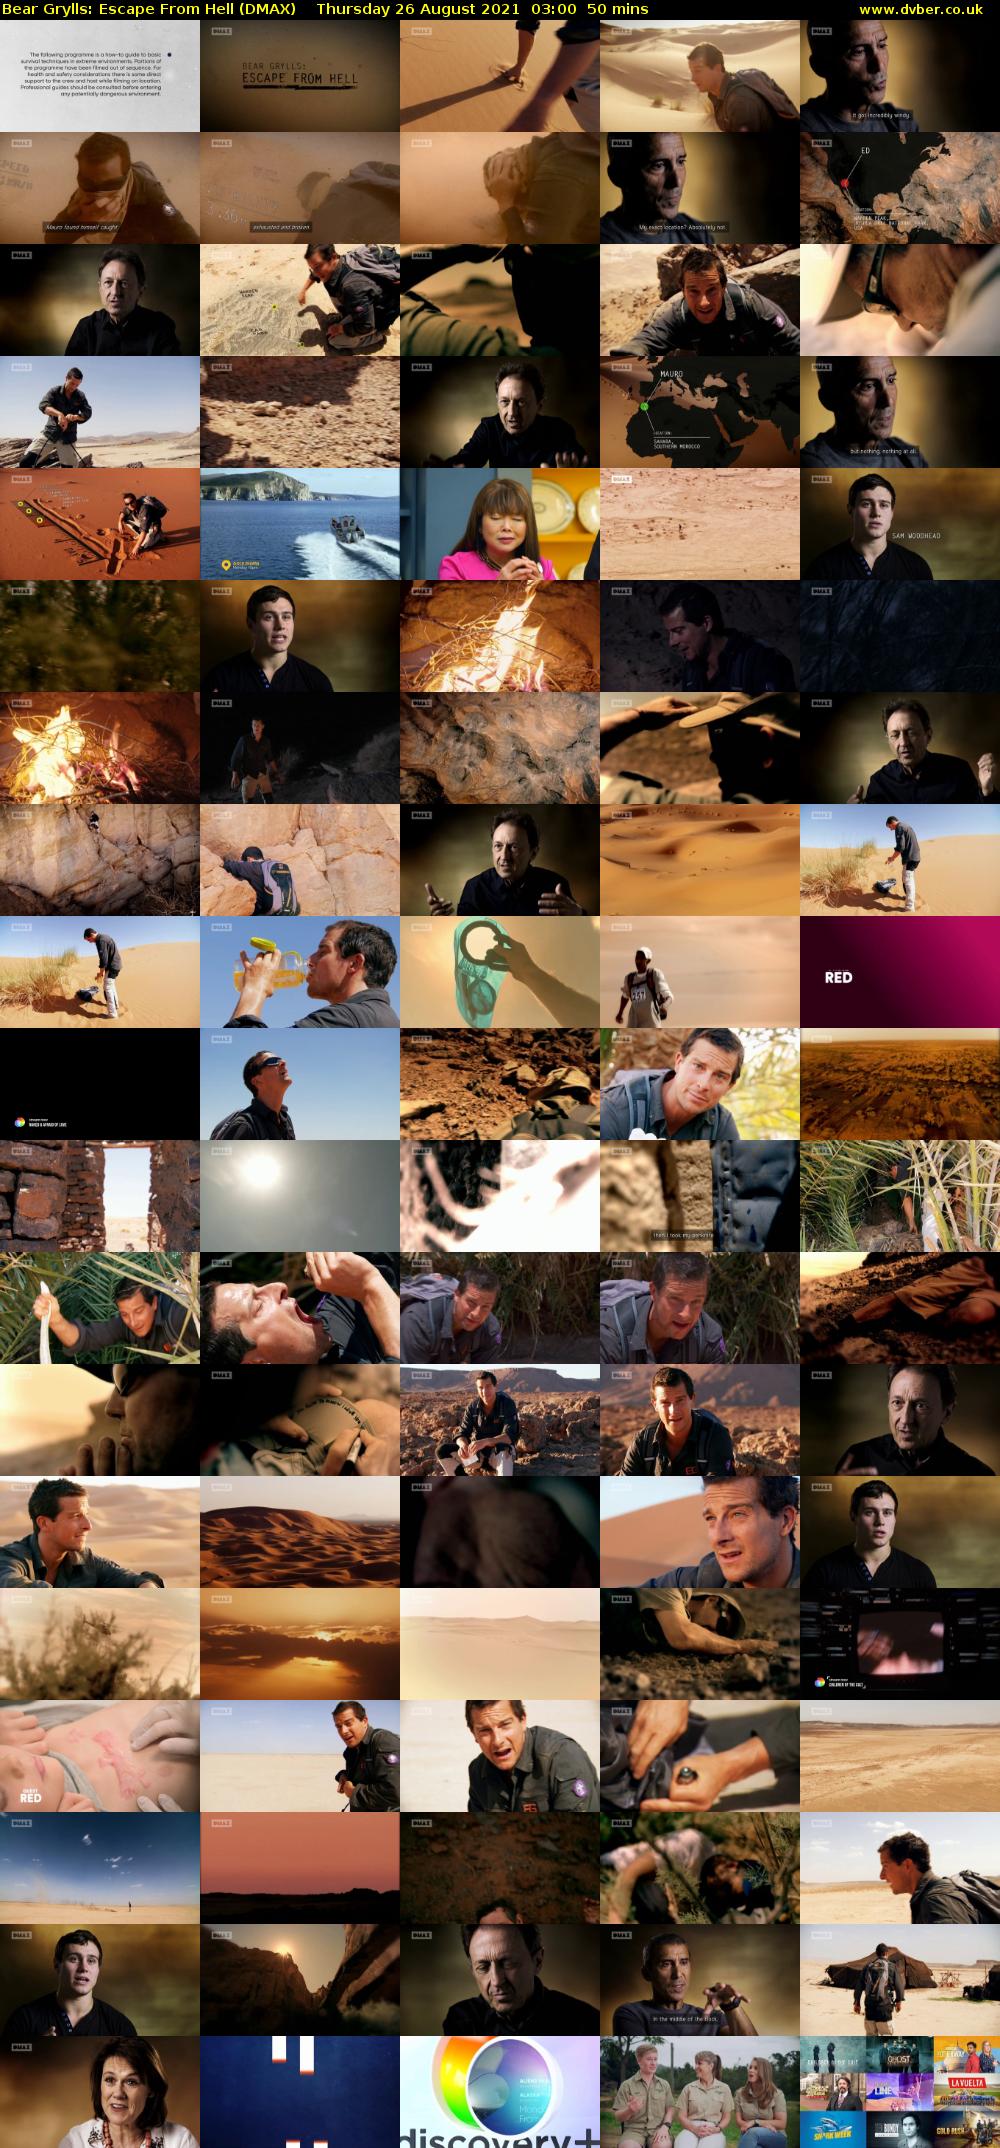 Bear Grylls: Escape From Hell (DMAX) Thursday 26 August 2021 03:00 - 03:50